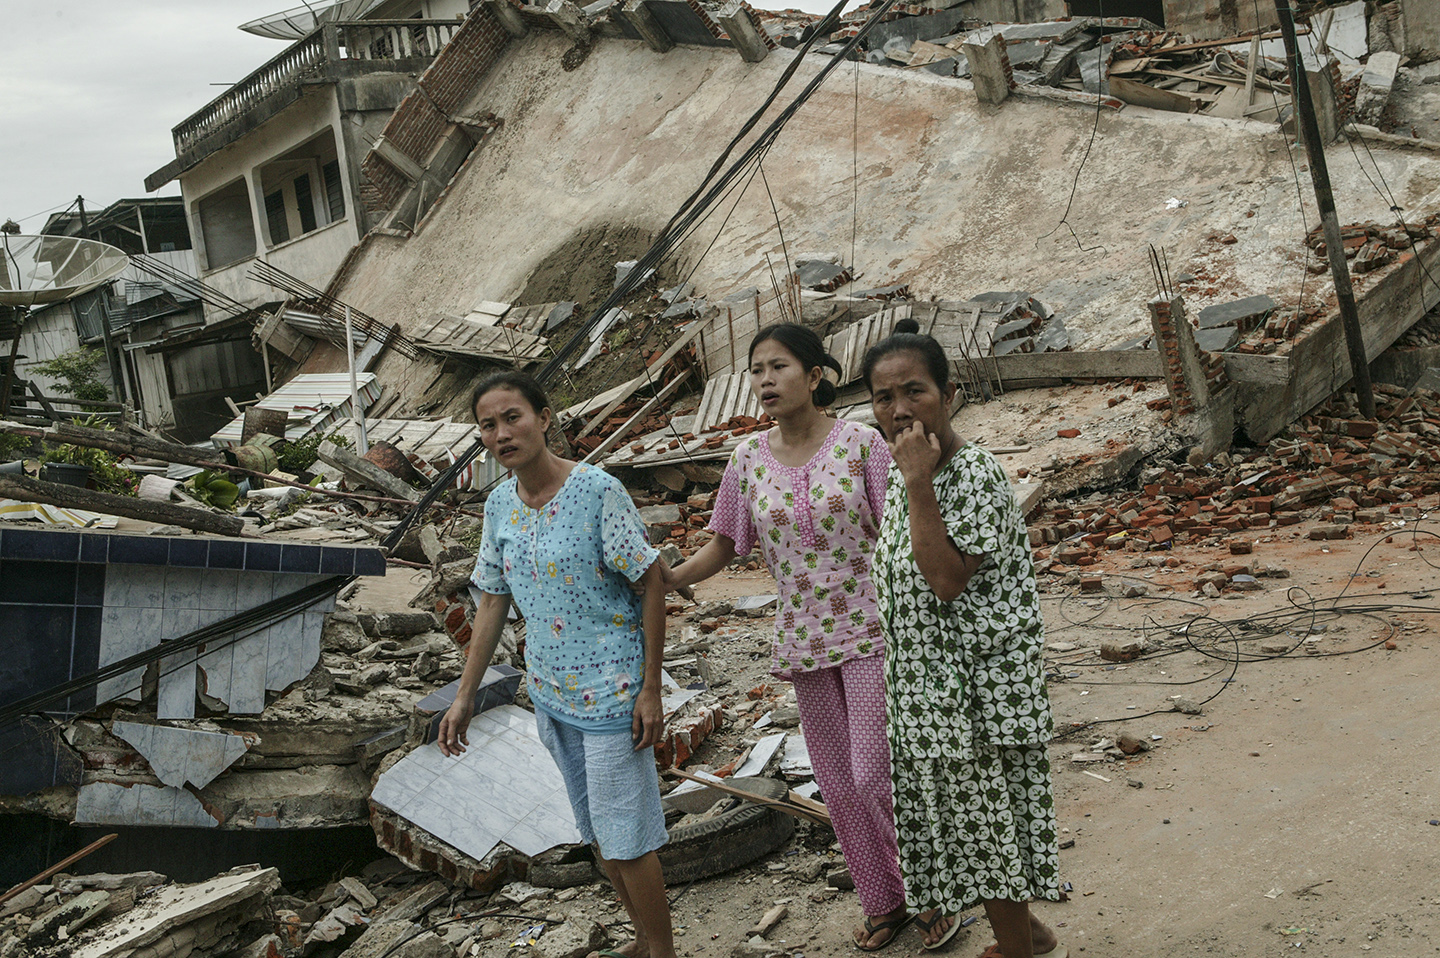  On March 28, 2005 the island of Nias, on the western coast of Sumatra, was hit by an 8.3 earthquake. 